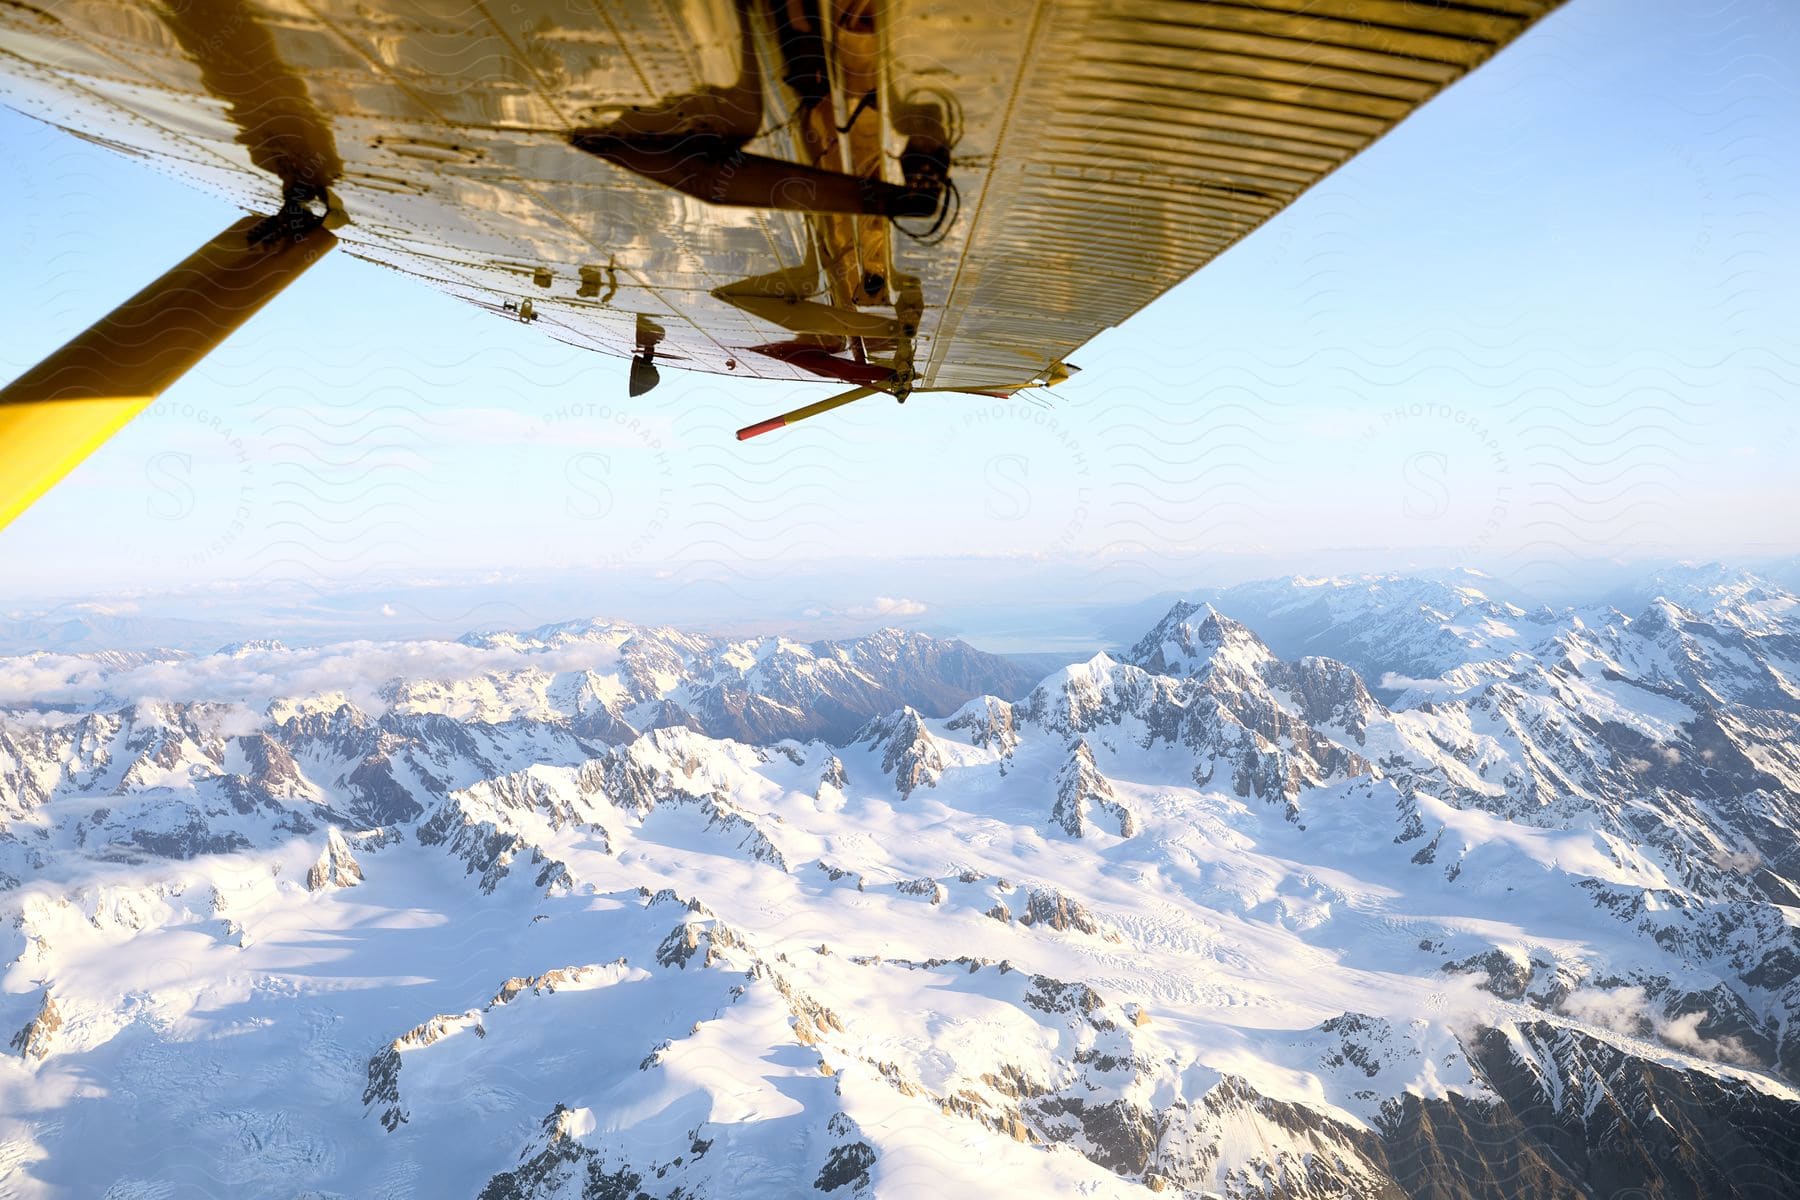 View from under an airplane wing of snow covered mountains across the landscape